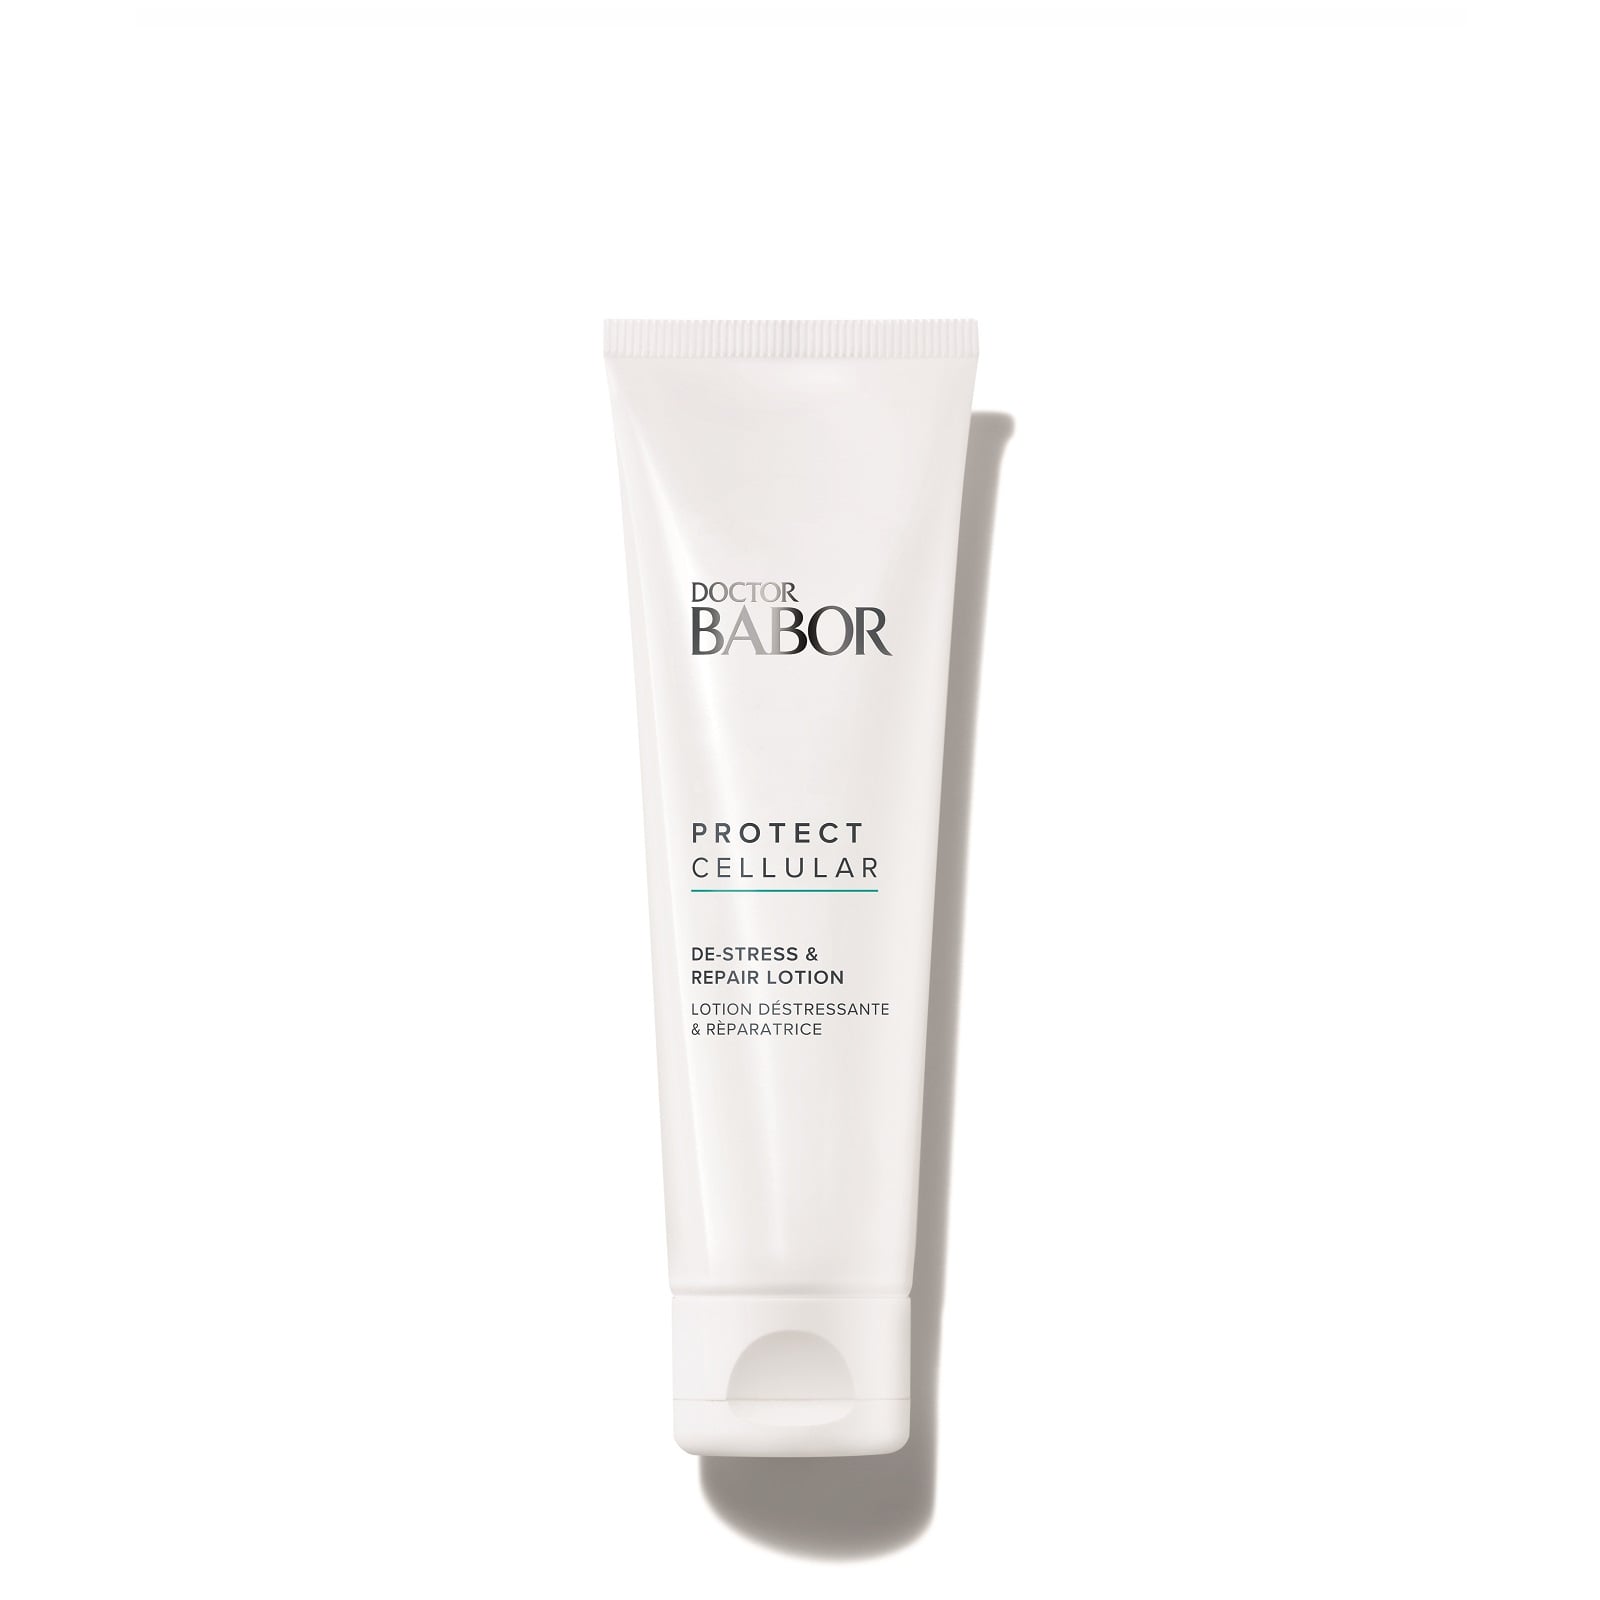 Dr. BABOR Protect Cellular De-Stress and Repair Lotion